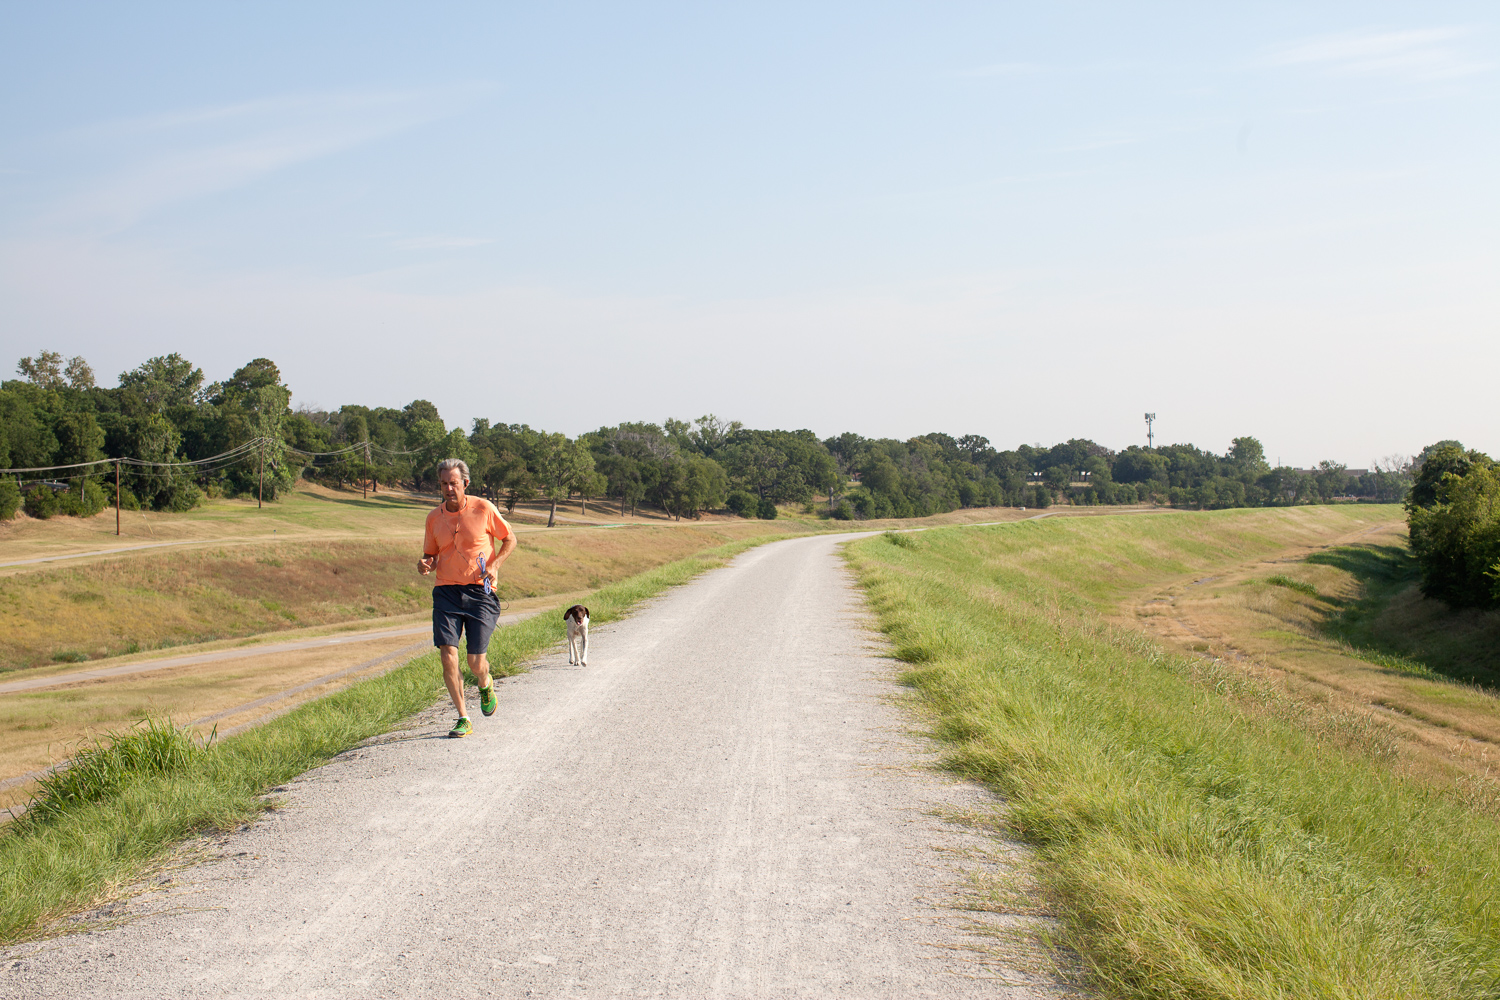 Runner with dog, Trinity River path, July 2013. Terry Evans